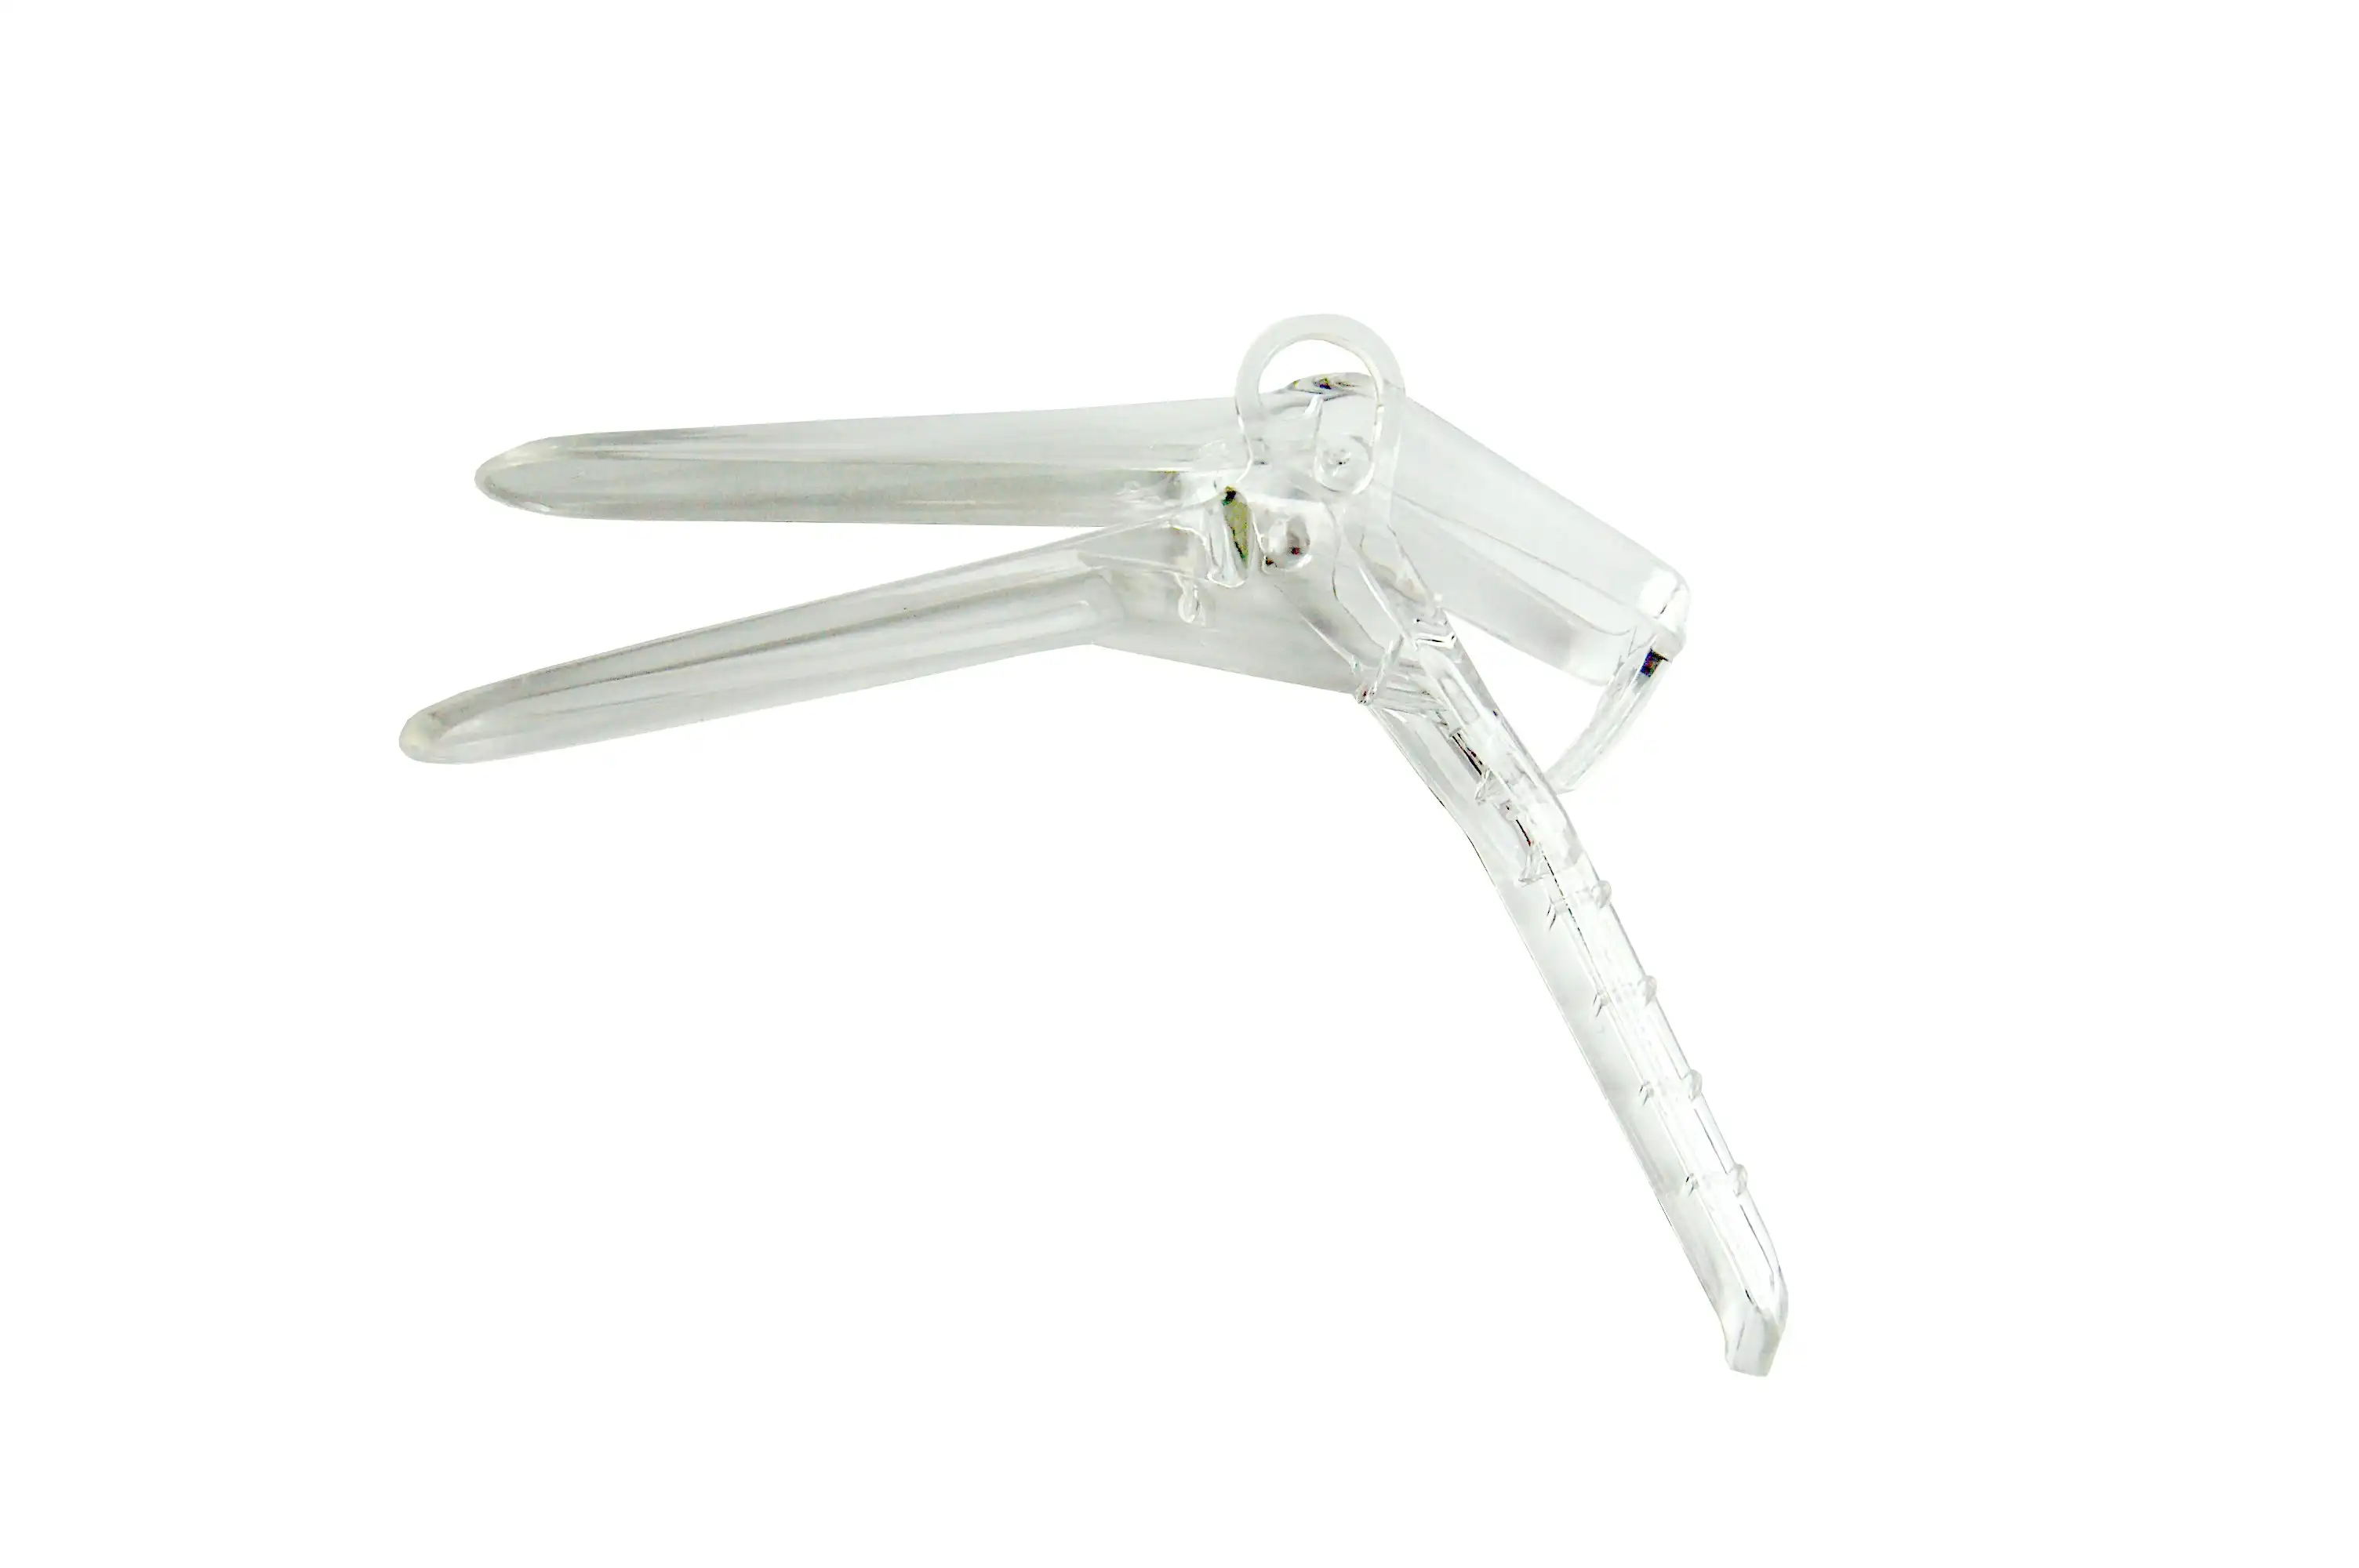 Lincon Vaginal Speculum, Duckbill, Ratchet Action, Recyclable Plastic, Sterile, Clear, Small, 240 Pieces/Carton